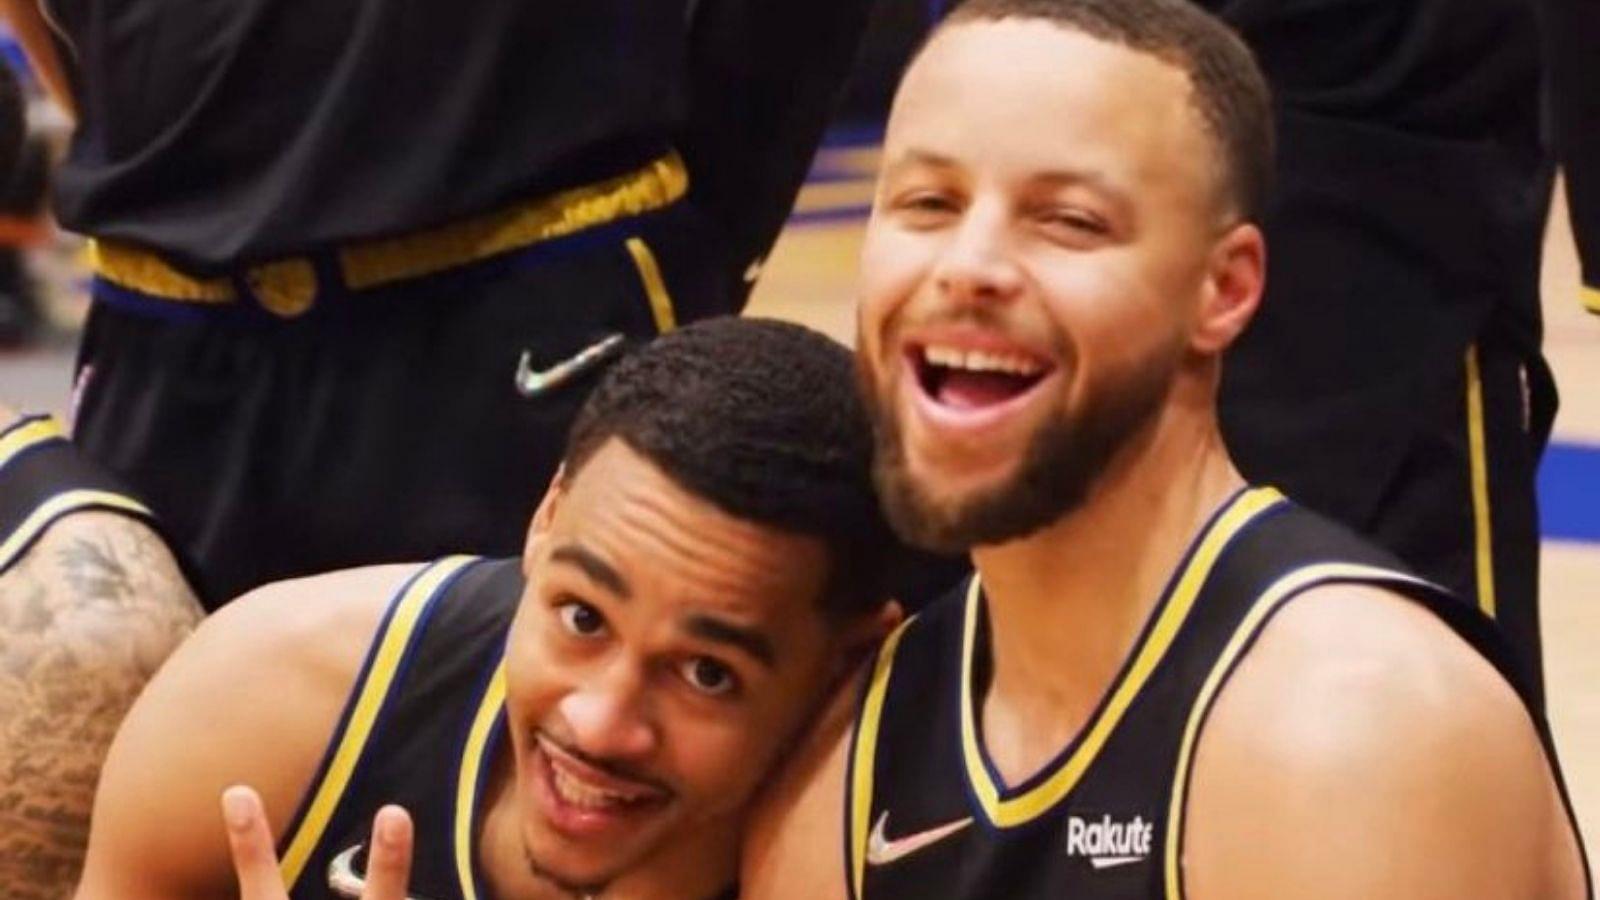 "Stephen Curry made Jordan Poole go WHEEEEE": A rare and joyous play between Warriors guards in Game 3 has NBA Twitter amazed